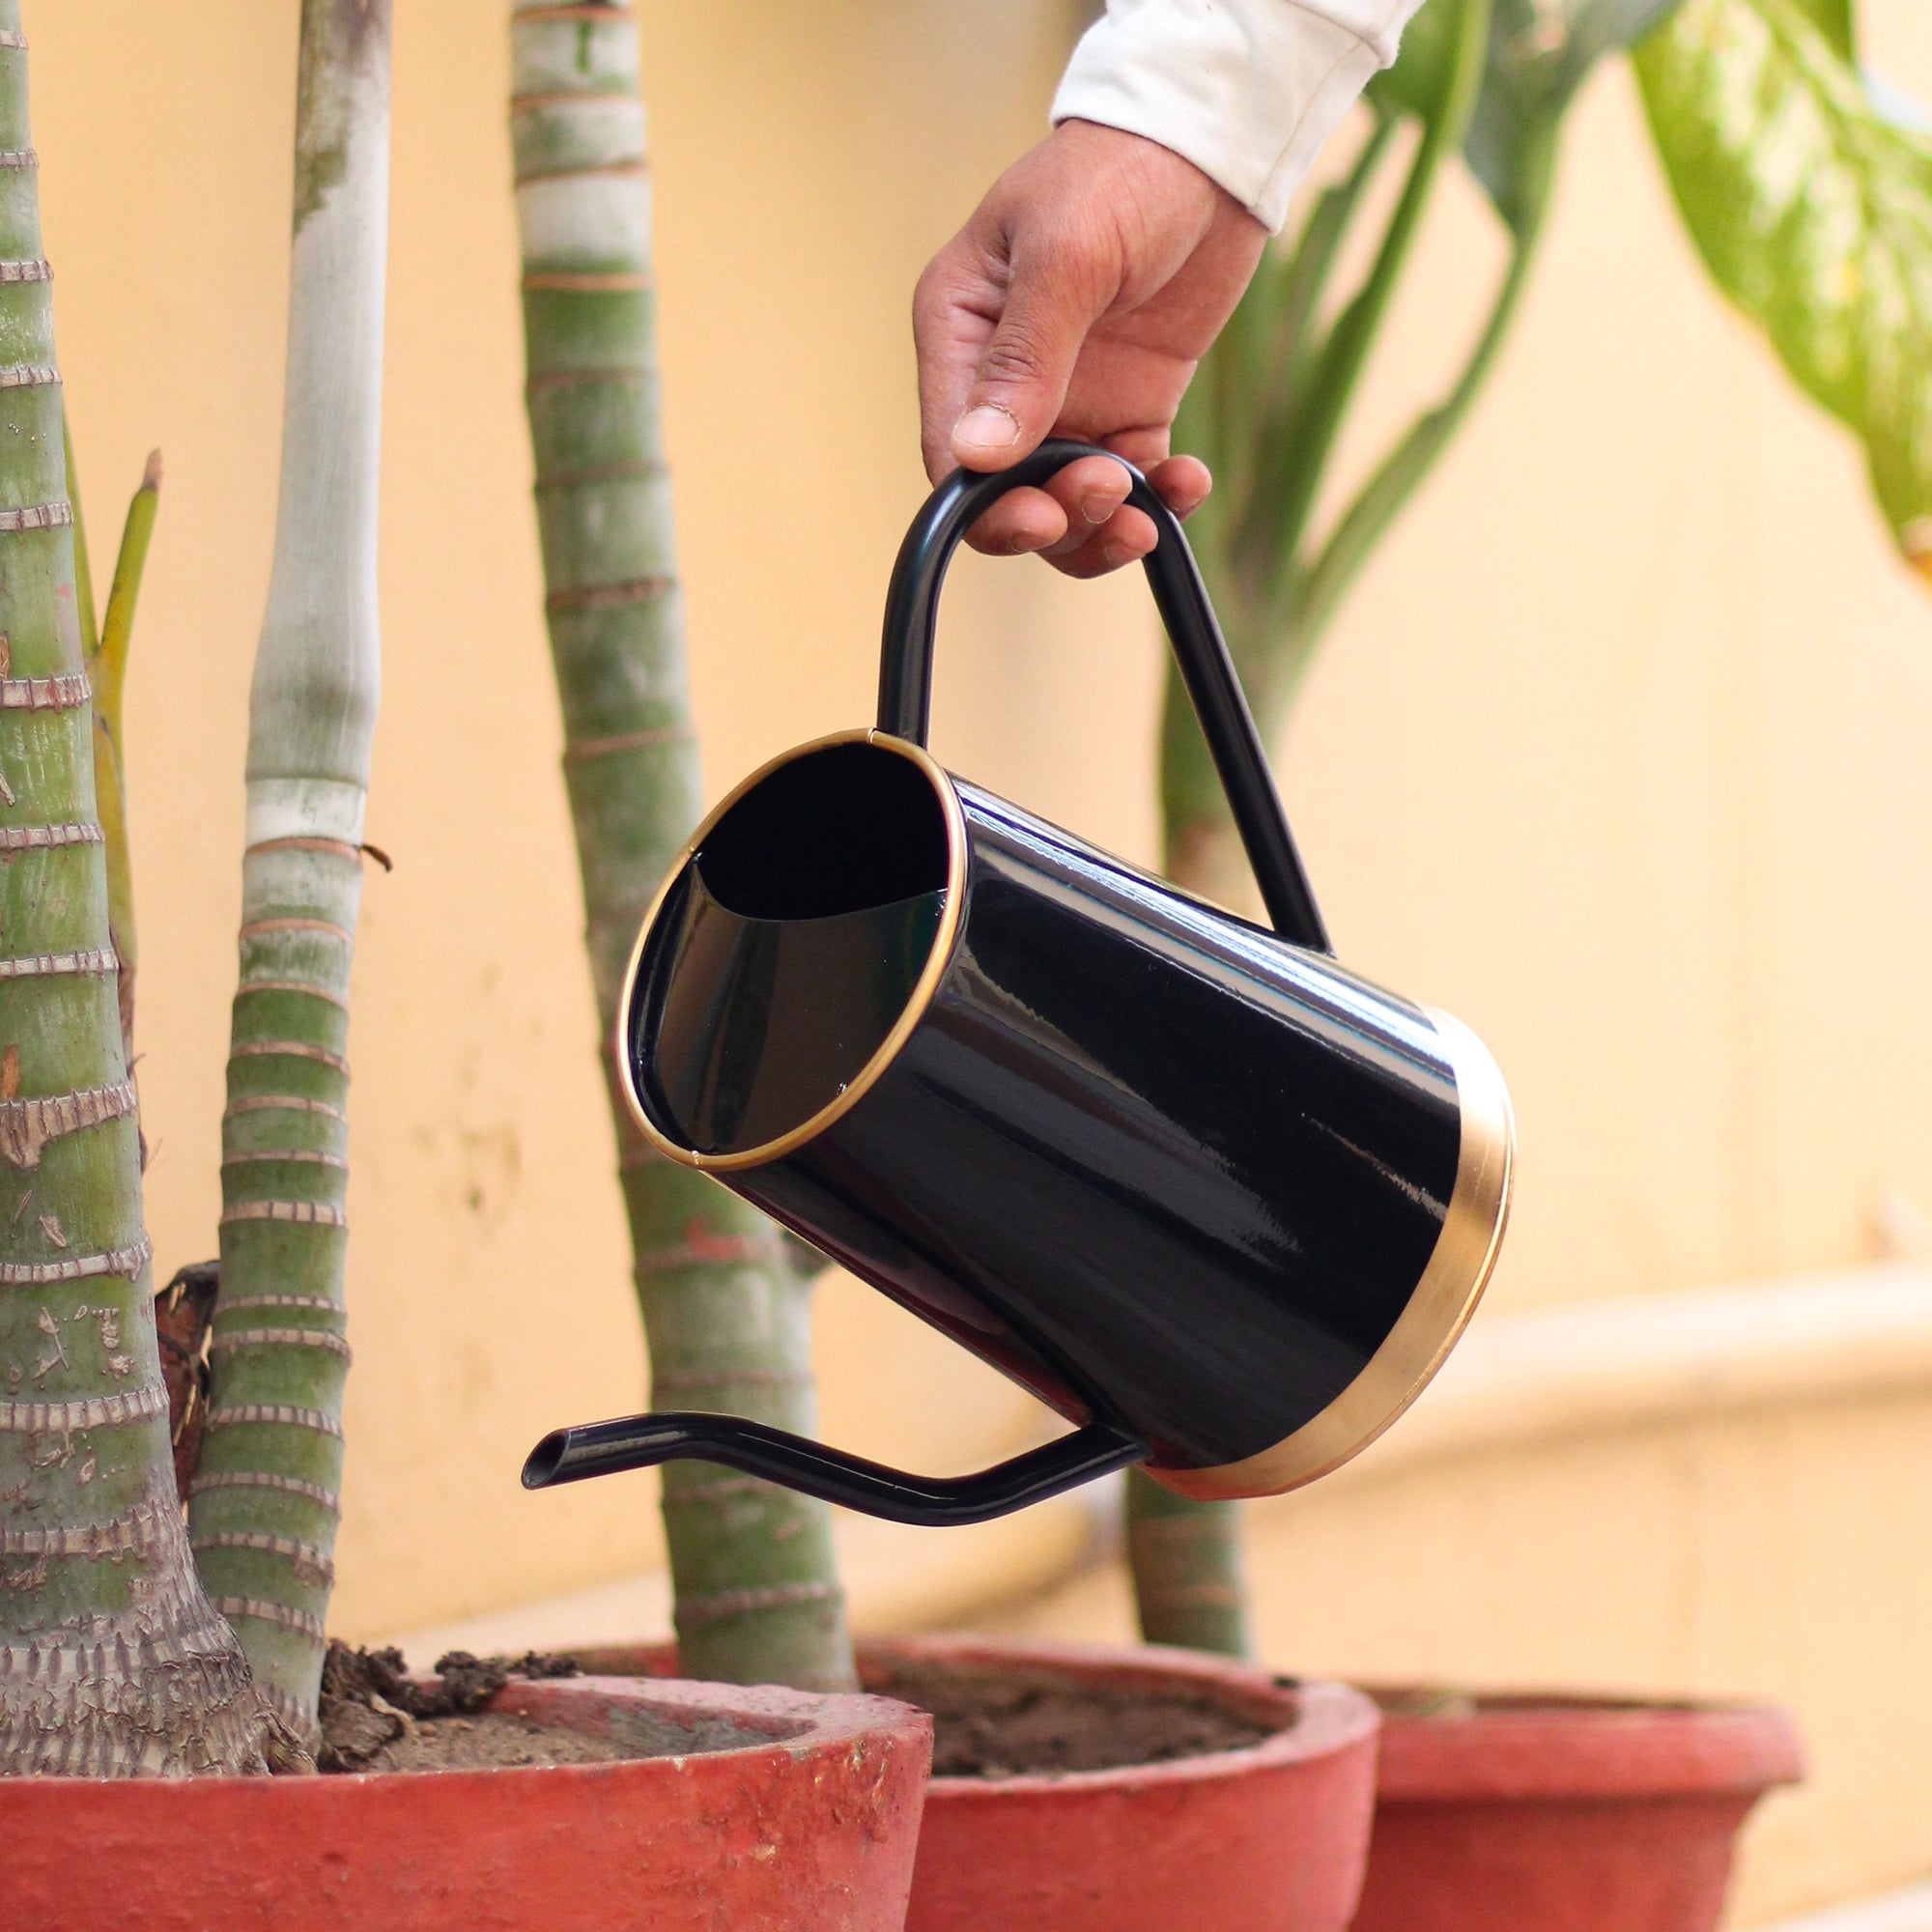 Urban Plant Metal Watering Can for Indoor & Outdoor Use | Best for Home Gardening | Terrace Garden Accessories | Watering Can with Long Spout - 1.5ltr Gardening Accessories Urban Plant Black 